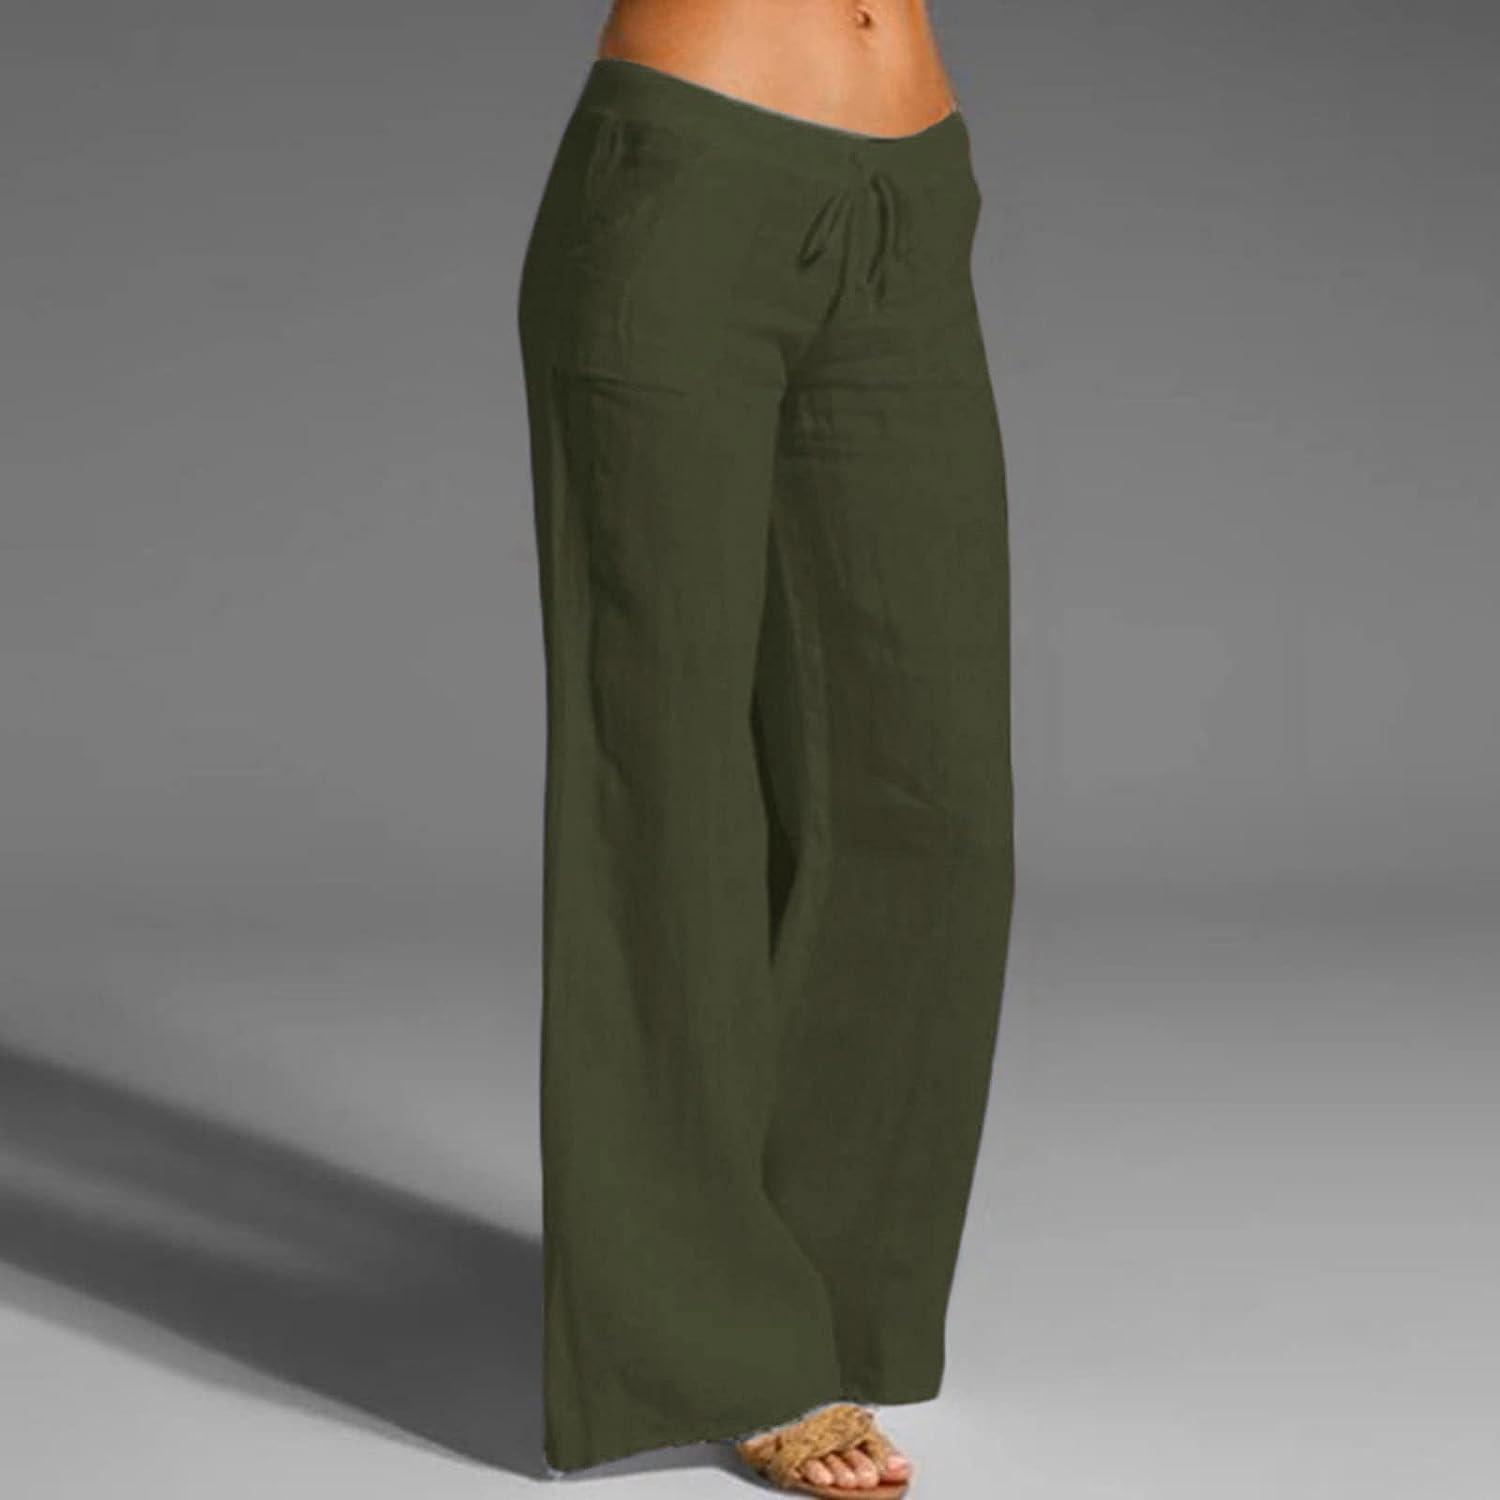 Lovely Nursling Crop Pants for Women Stretch, Women Tapered Pants